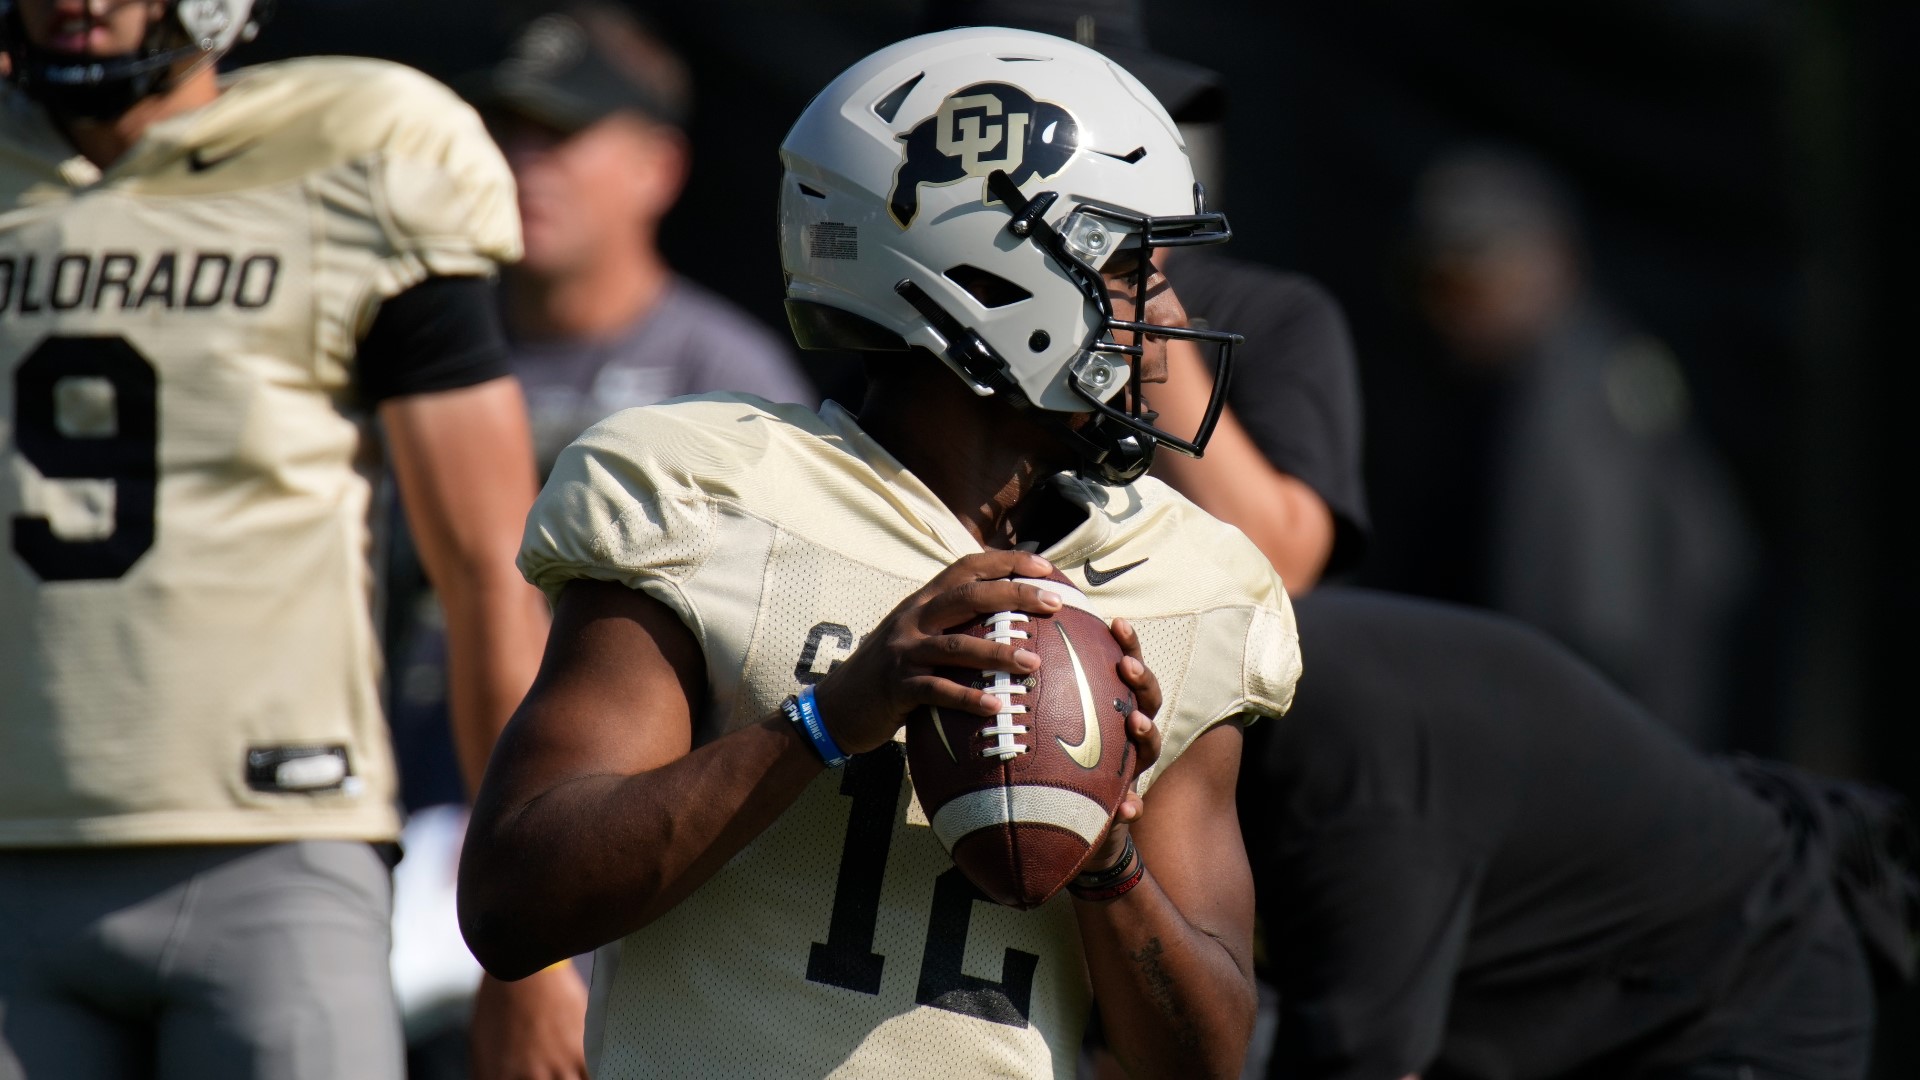 Lewis and the Buffs open the season on Friday night at Folsom Field against Northern Colorado.